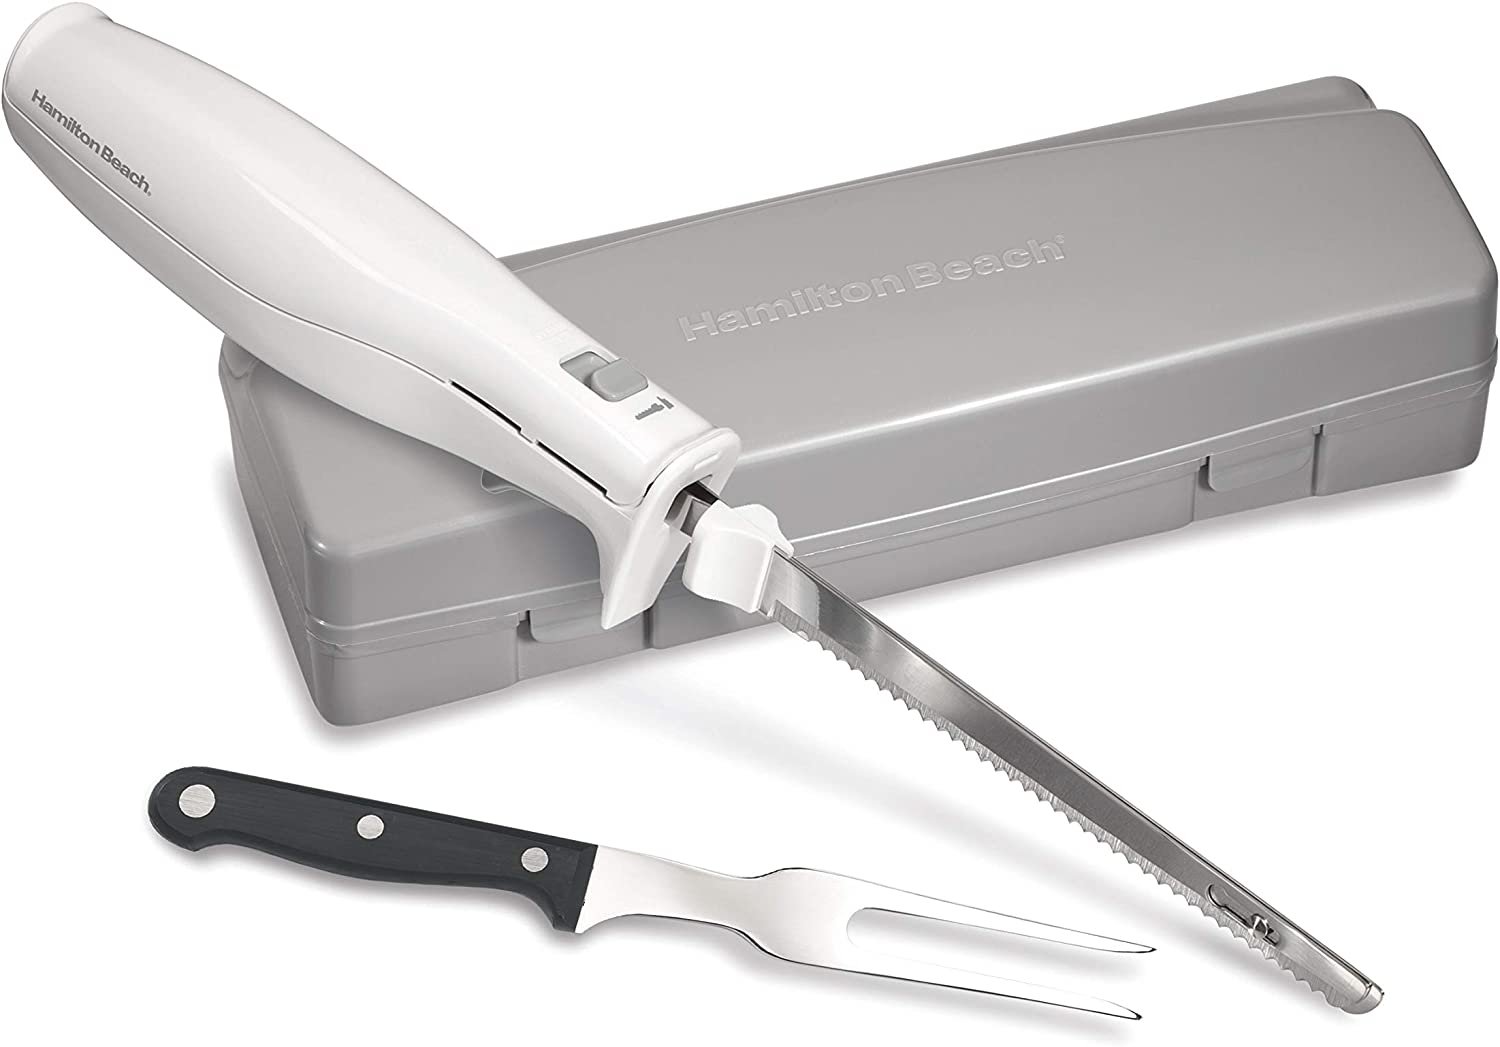 Hamilton Beach Electric Knife for Carving Meats, Poultry, Bread, Crafting Foam & More, Storage Case & Serving Fork Included,